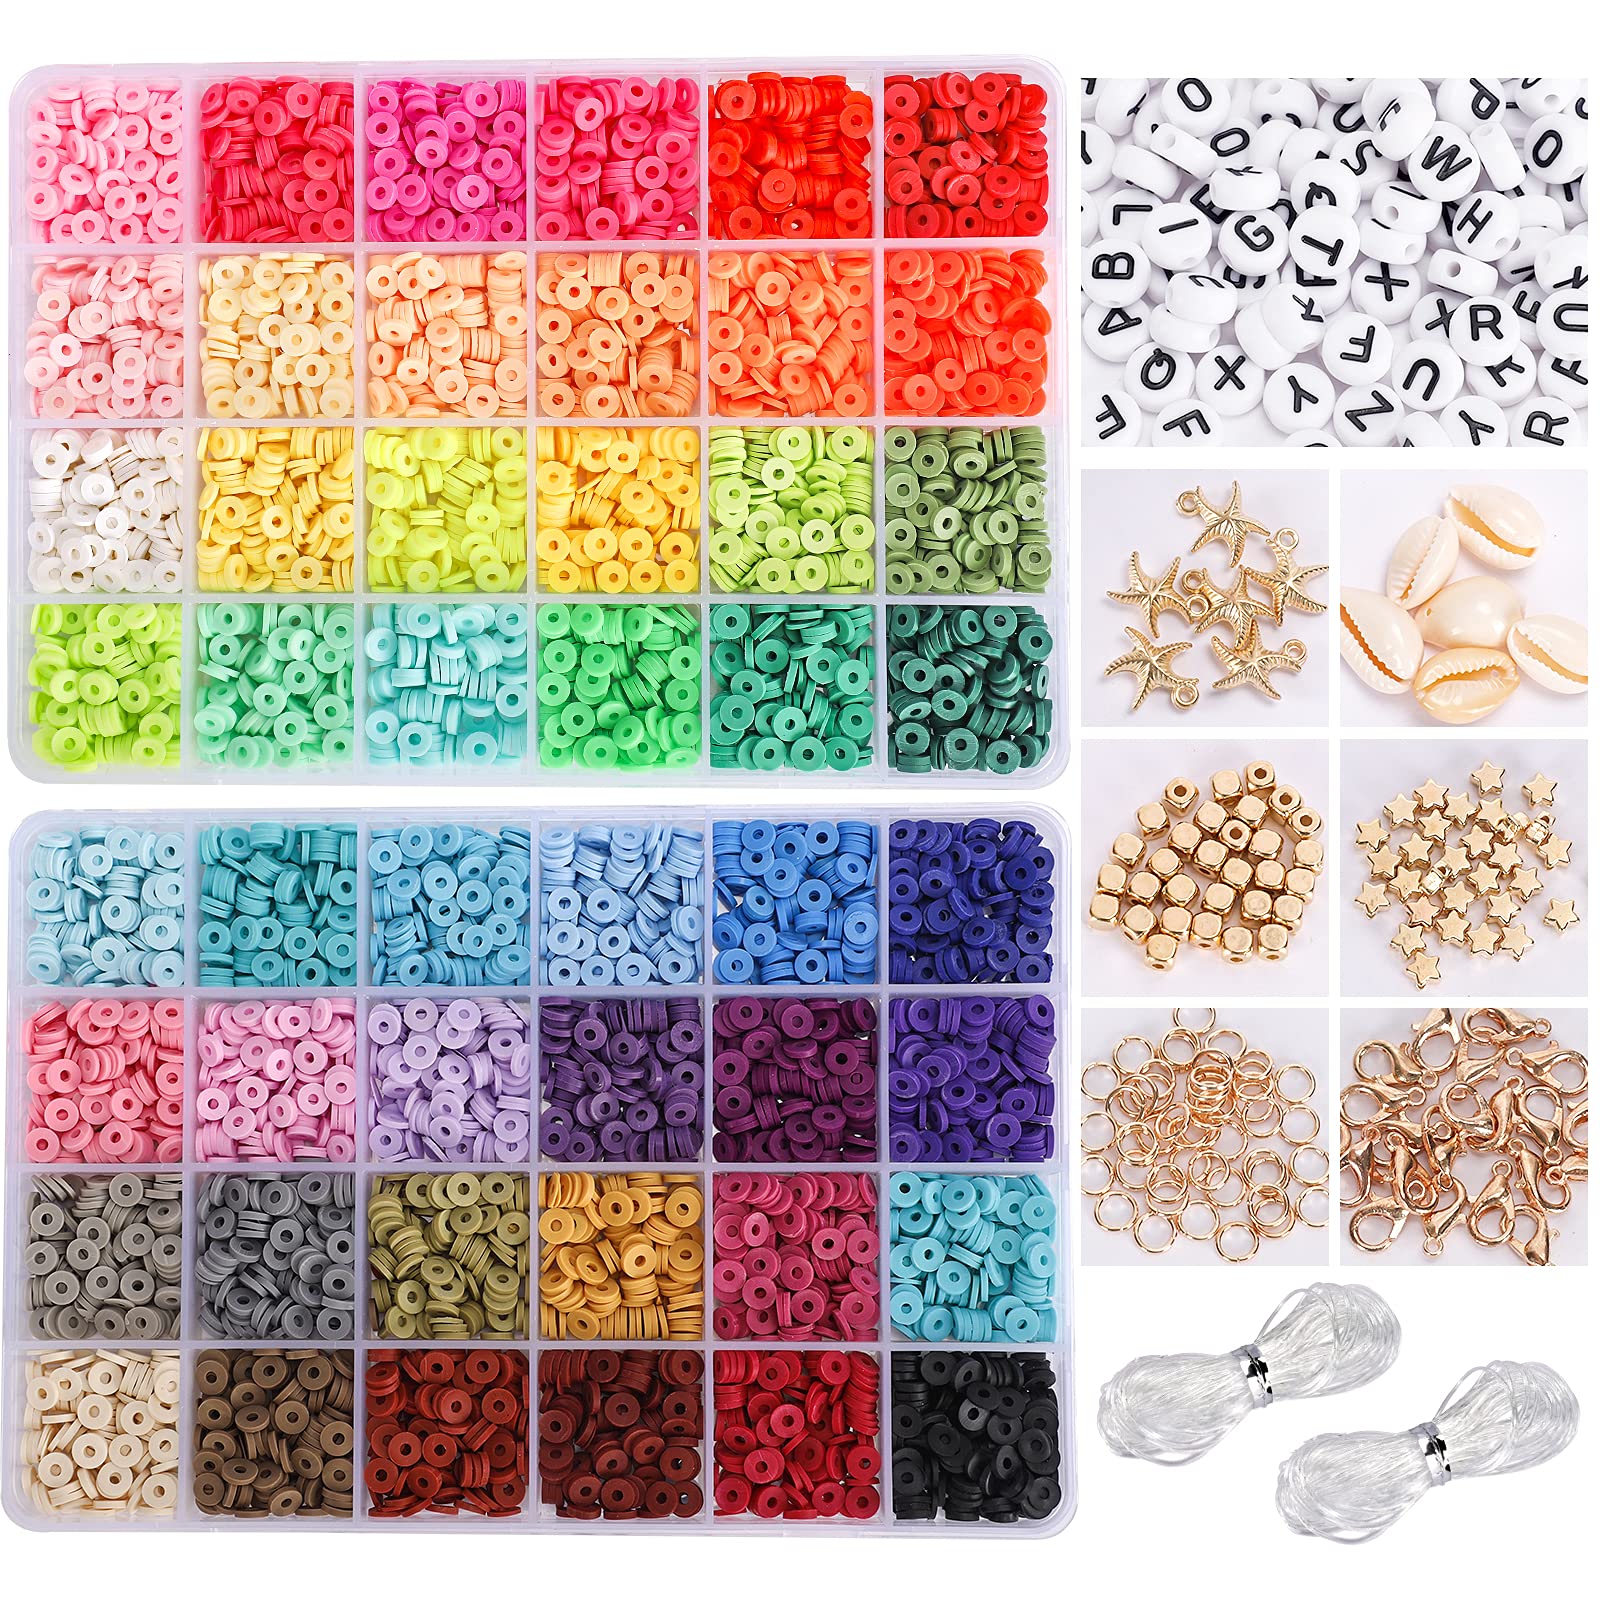 Quefe 6300pcs Clay Beads with 130pcs Letter Beads, Polymer Clay Beads Kit  with Elastic String, Pendant, and Jump Rings, for DIY